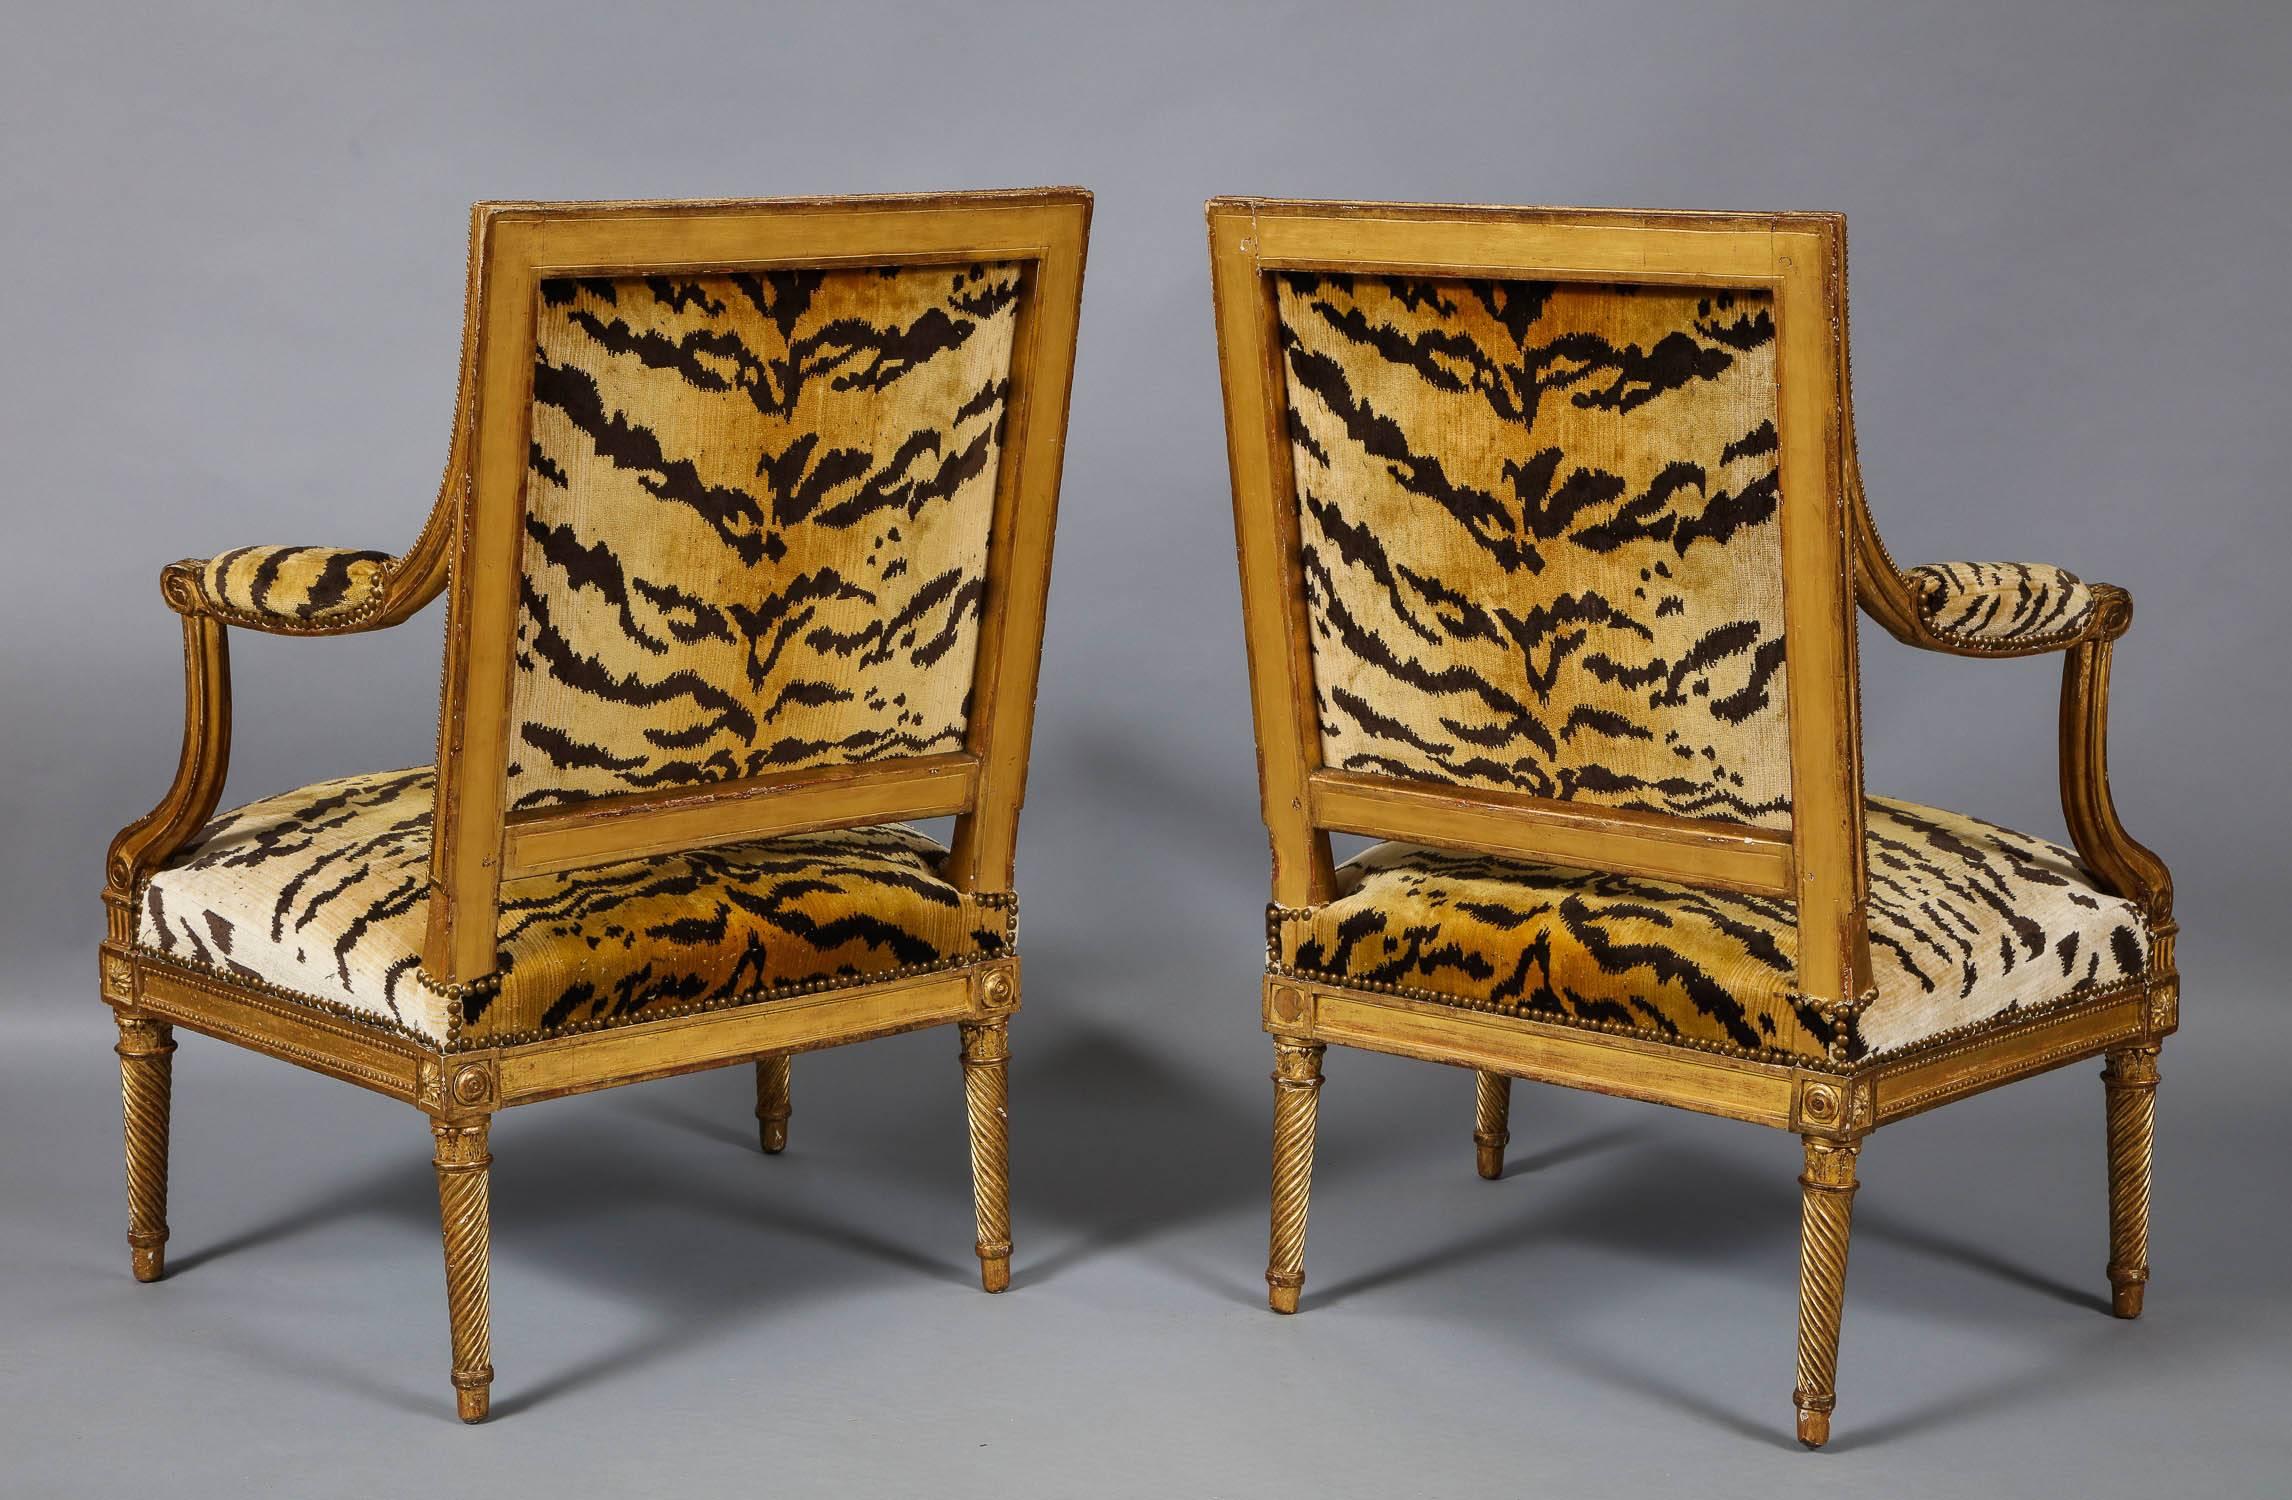 Important Pair of Louis XVI Giltwood Chairs by Jacob 5